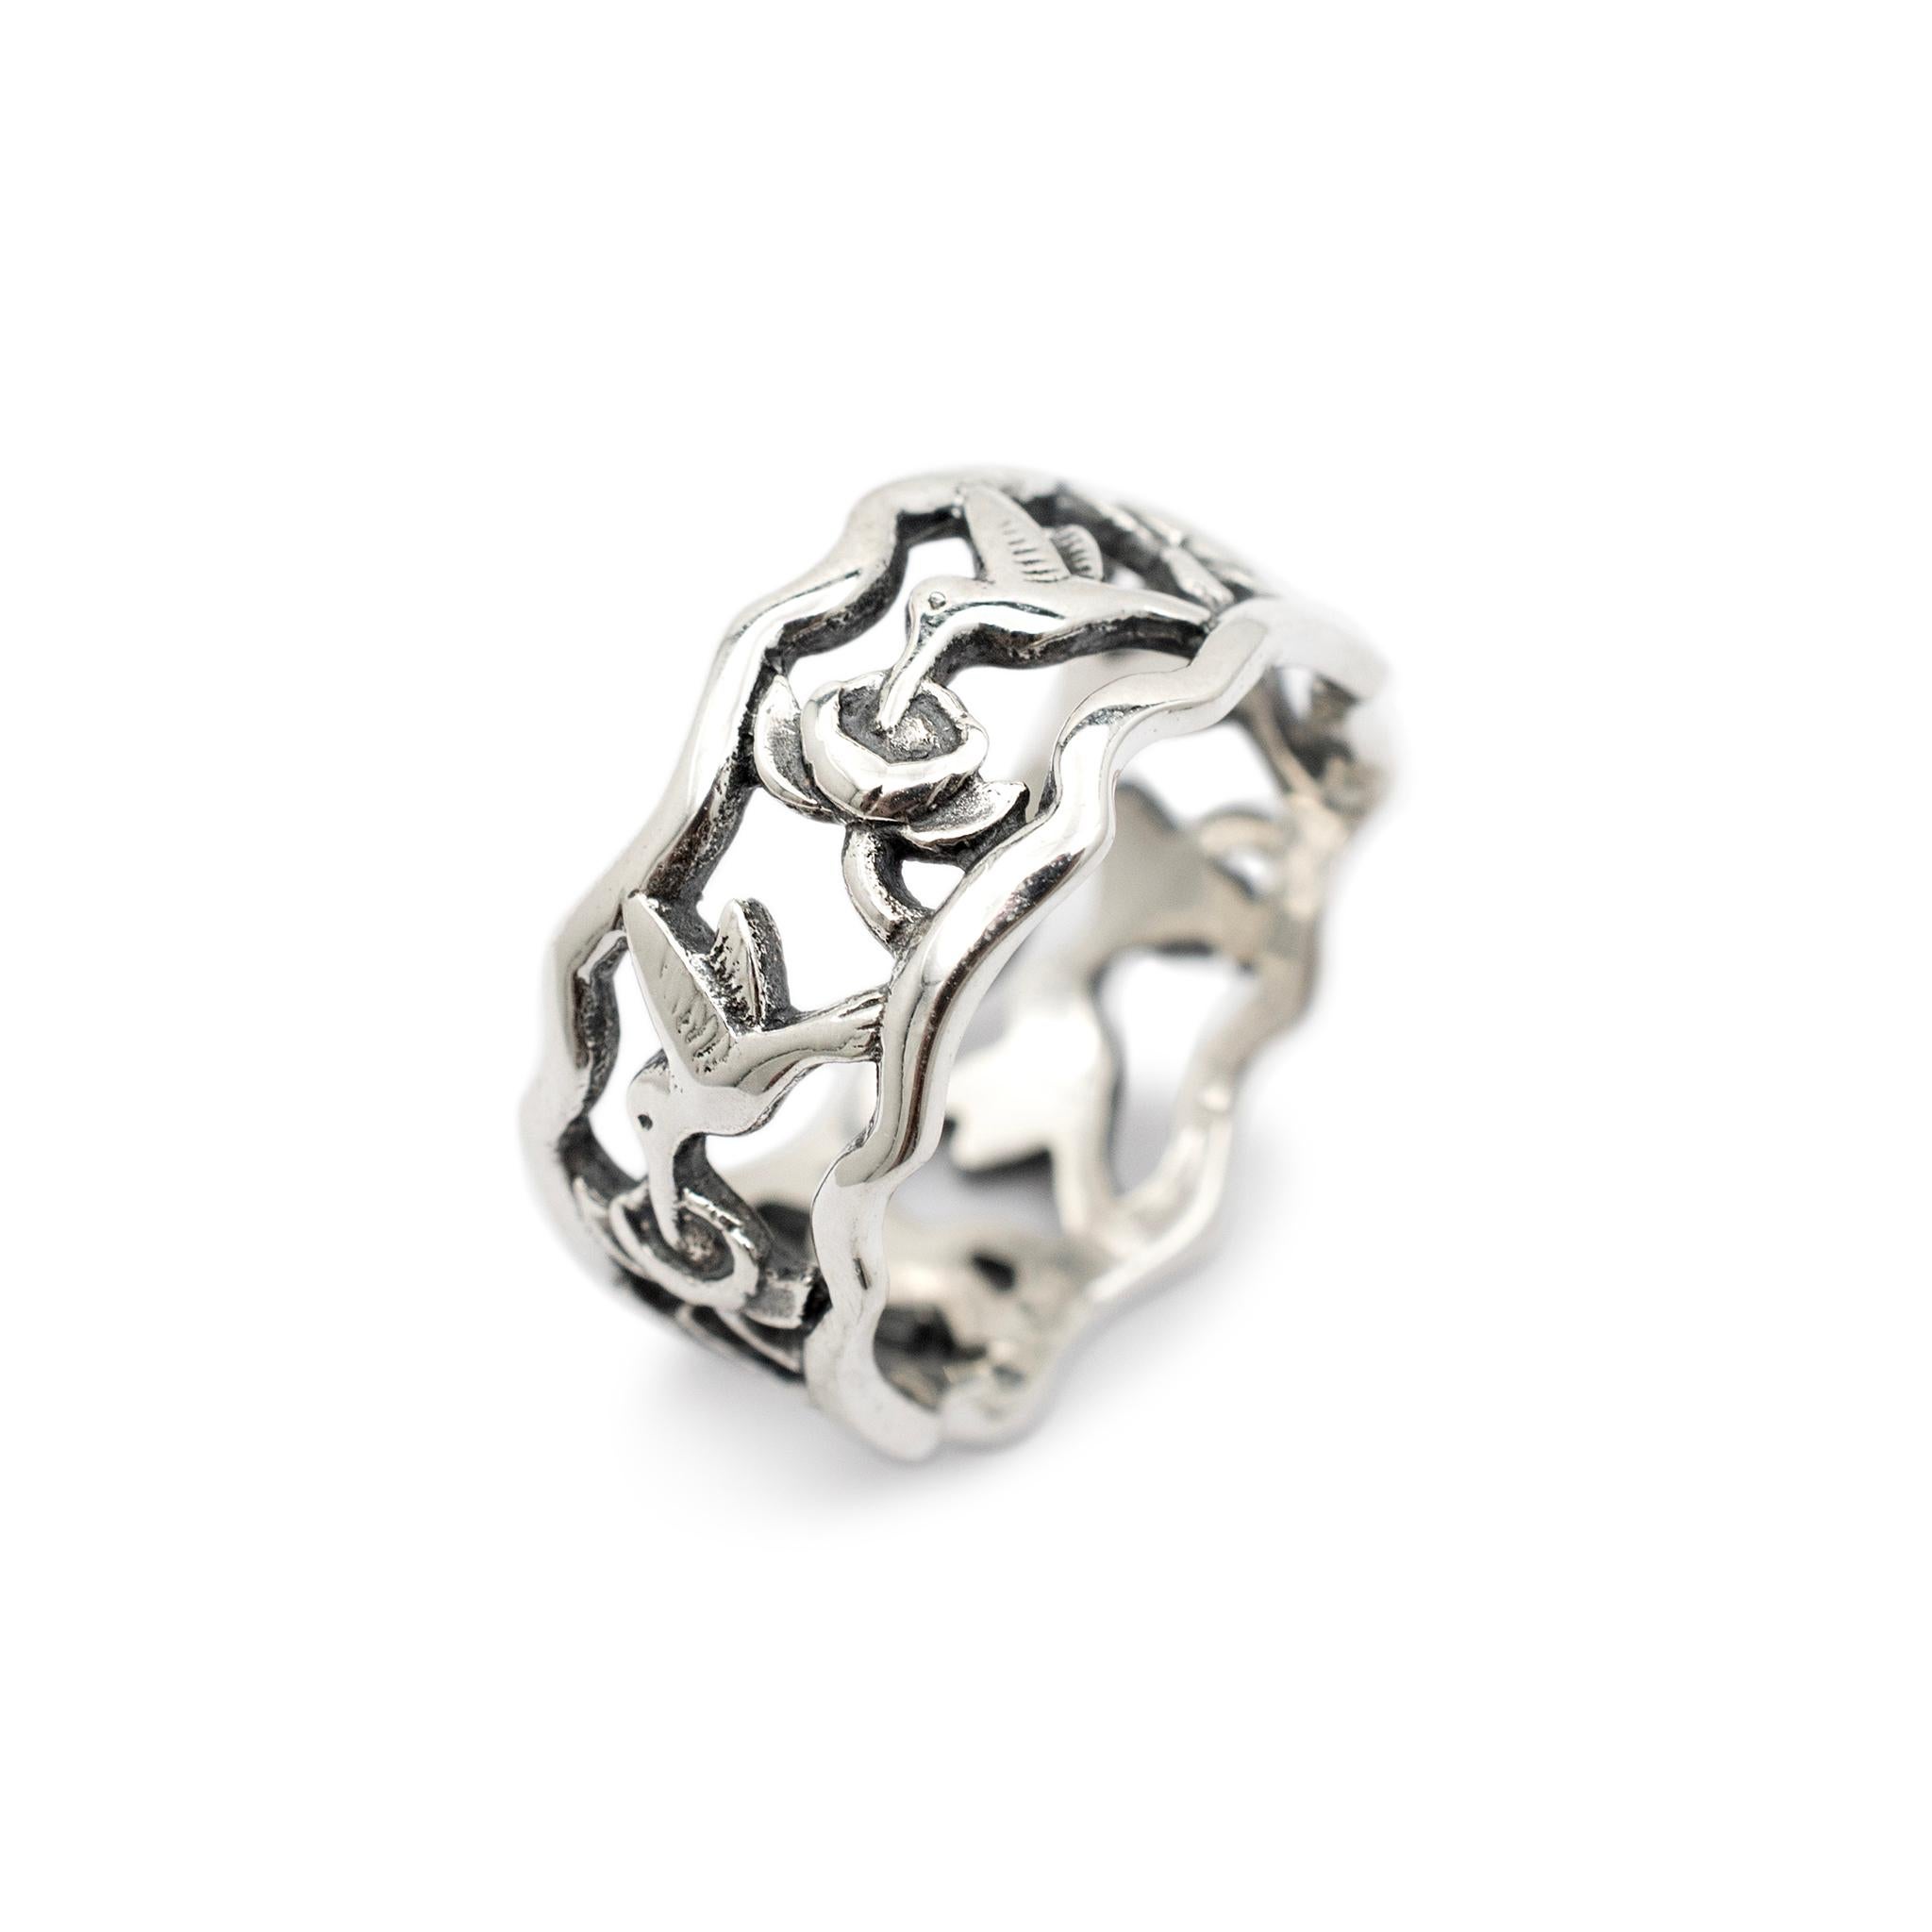 Brand: James Avery

Gender: Ladies

Metal Type: 925 Sterling Silver

Size: 7

Shank Maximum Width: 9.40 mm

Weight: 4.10 grams

Ladies silver cocktail ring. The 